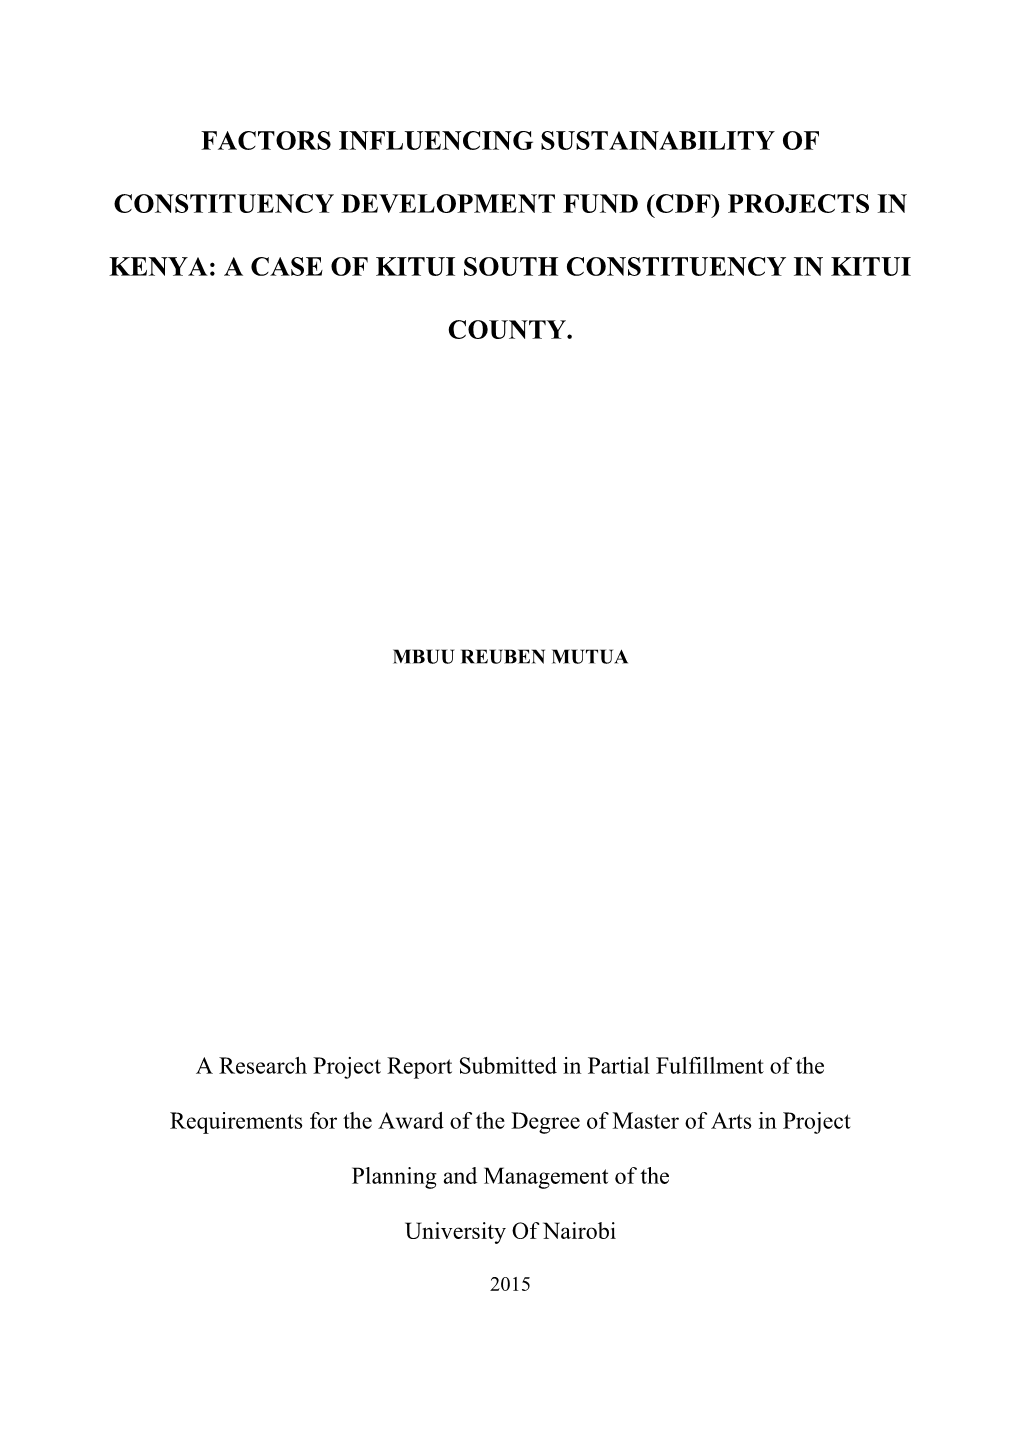 Factors Influencing Sustainability of Constituency Development Fund (Cdf) Projects in Kenya: a Case of Kitui South Constituency